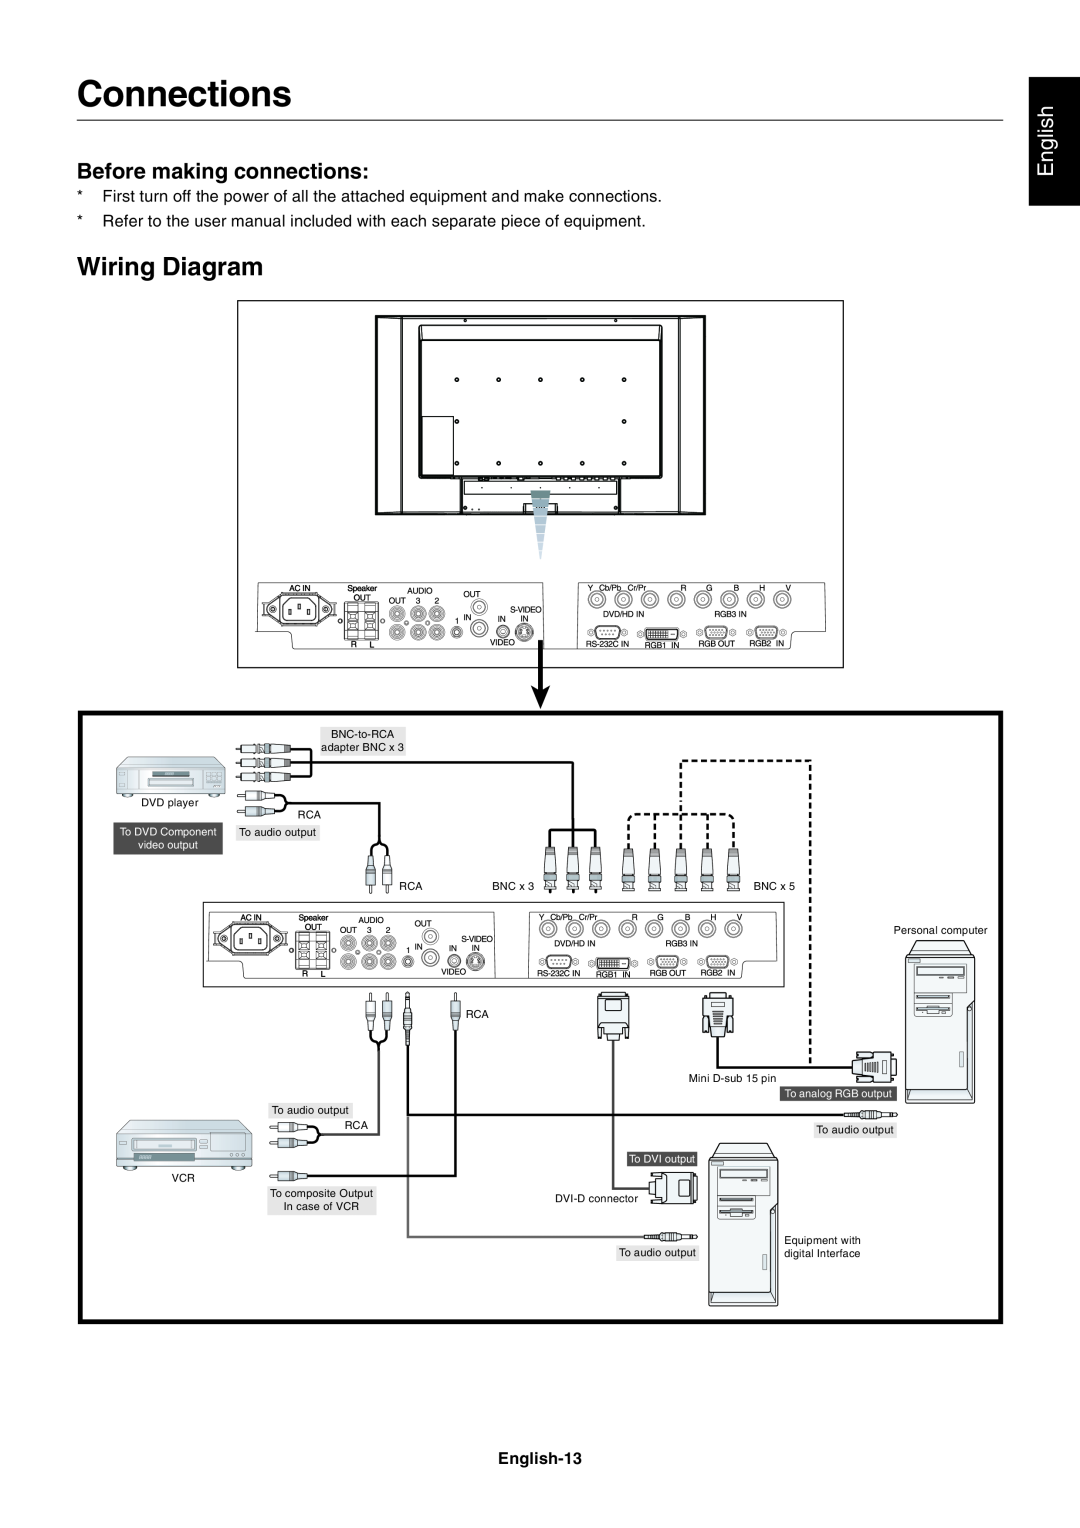 NEC LCD4215, LCD3215 user manual Connections, Wiring Diagram, Before making connections, English 